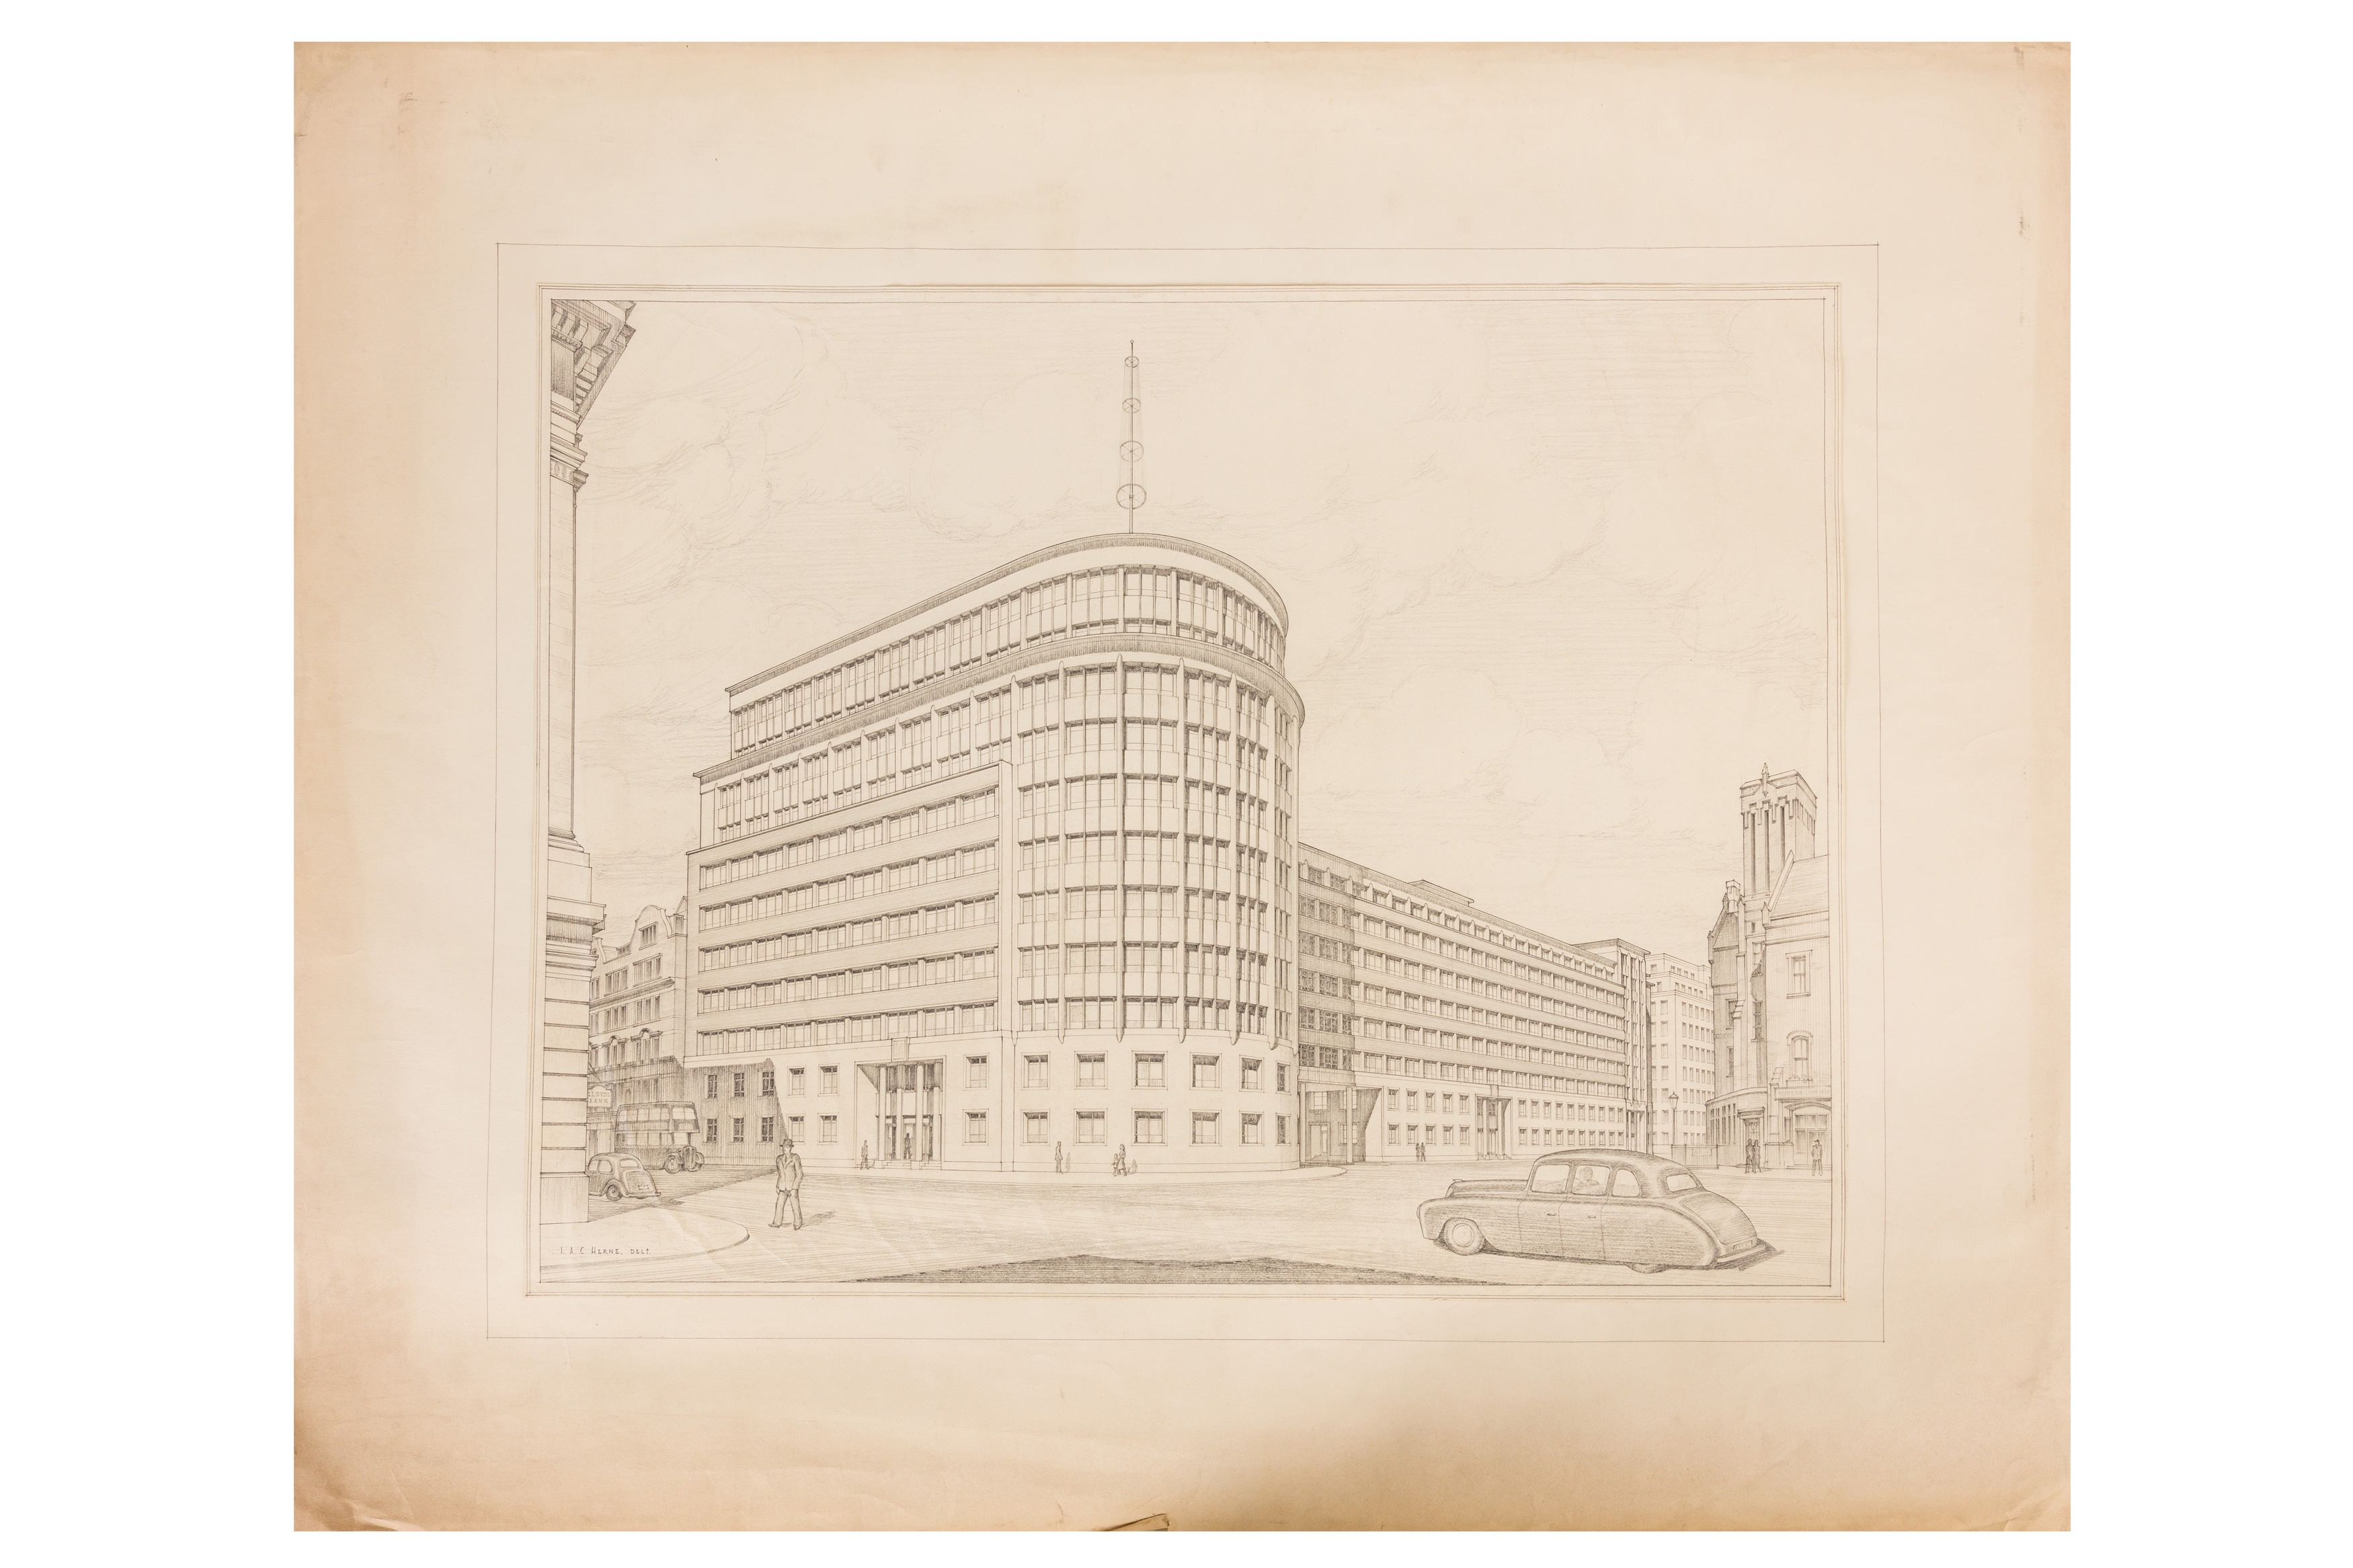 Archive of architect Ivor Herne, works in India, architectural illustrations, plans, stage designs a - Image 5 of 12